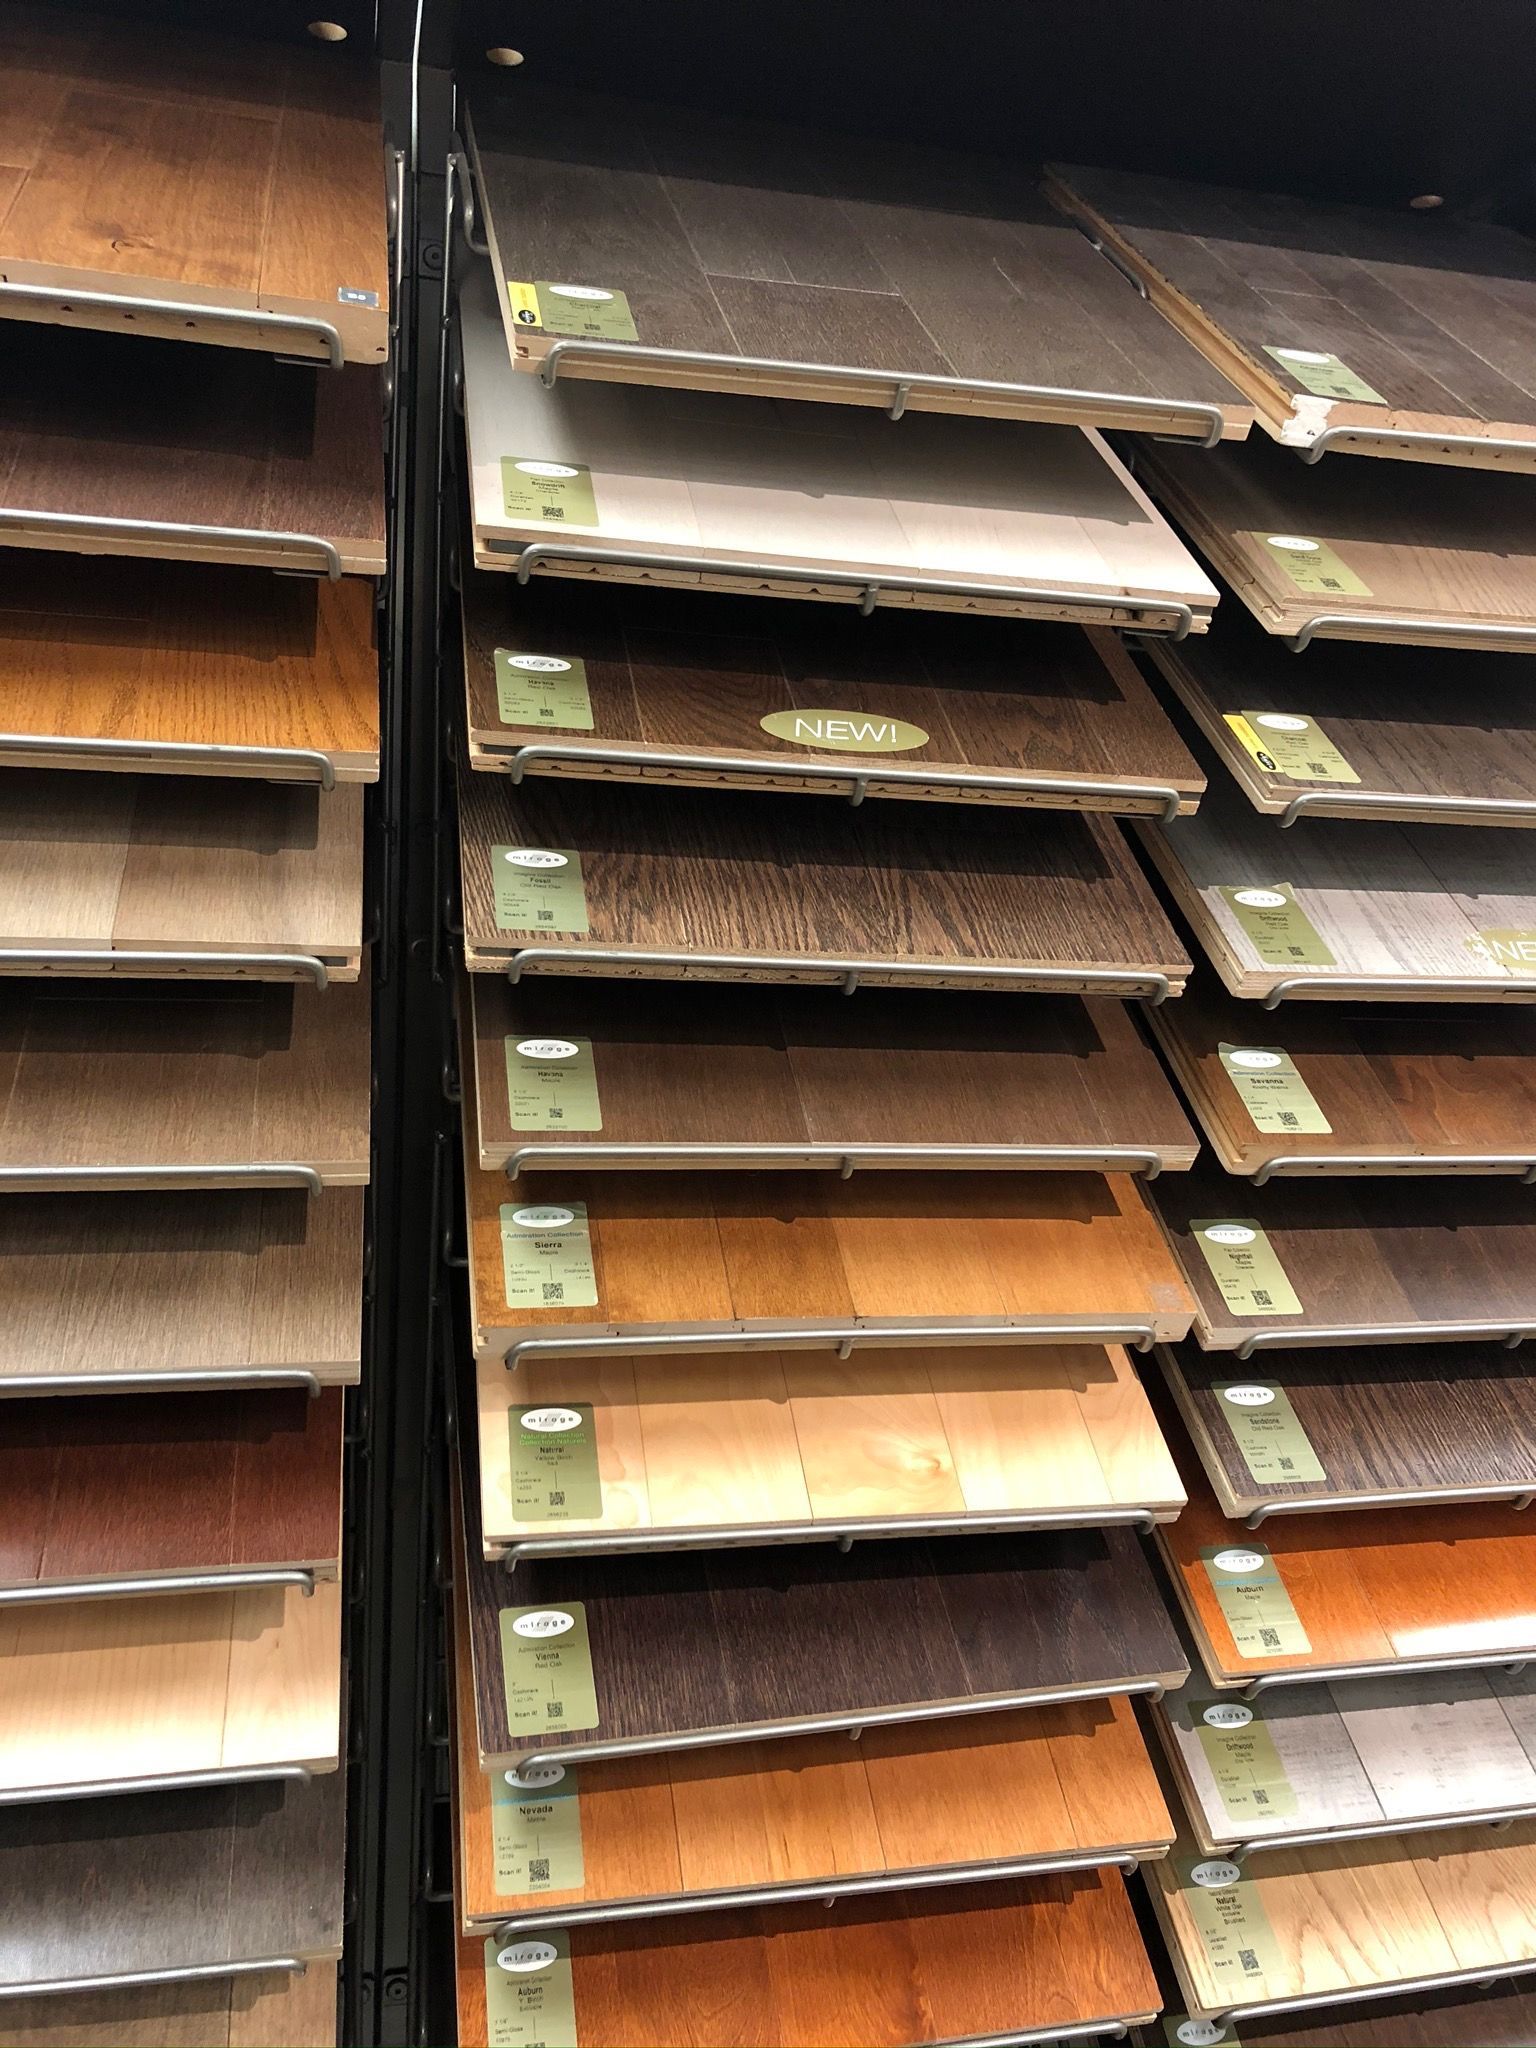 A display of different types of hardwood flooring in a store.